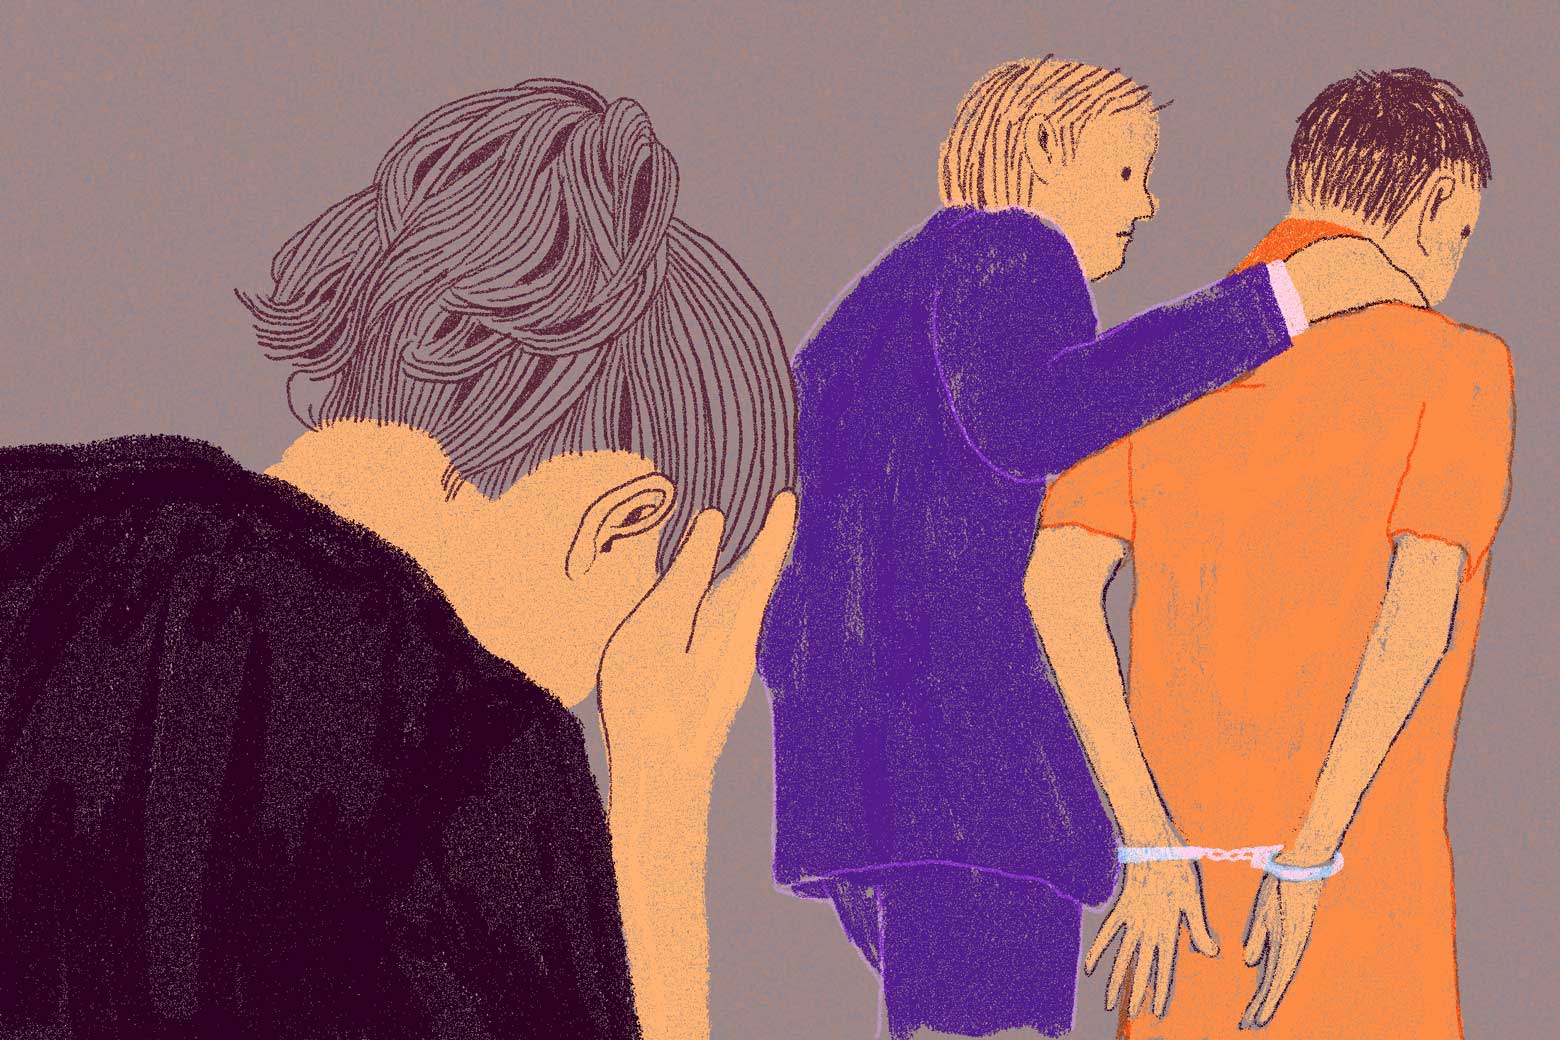 Why the criminal justice system goes easy on rapists.